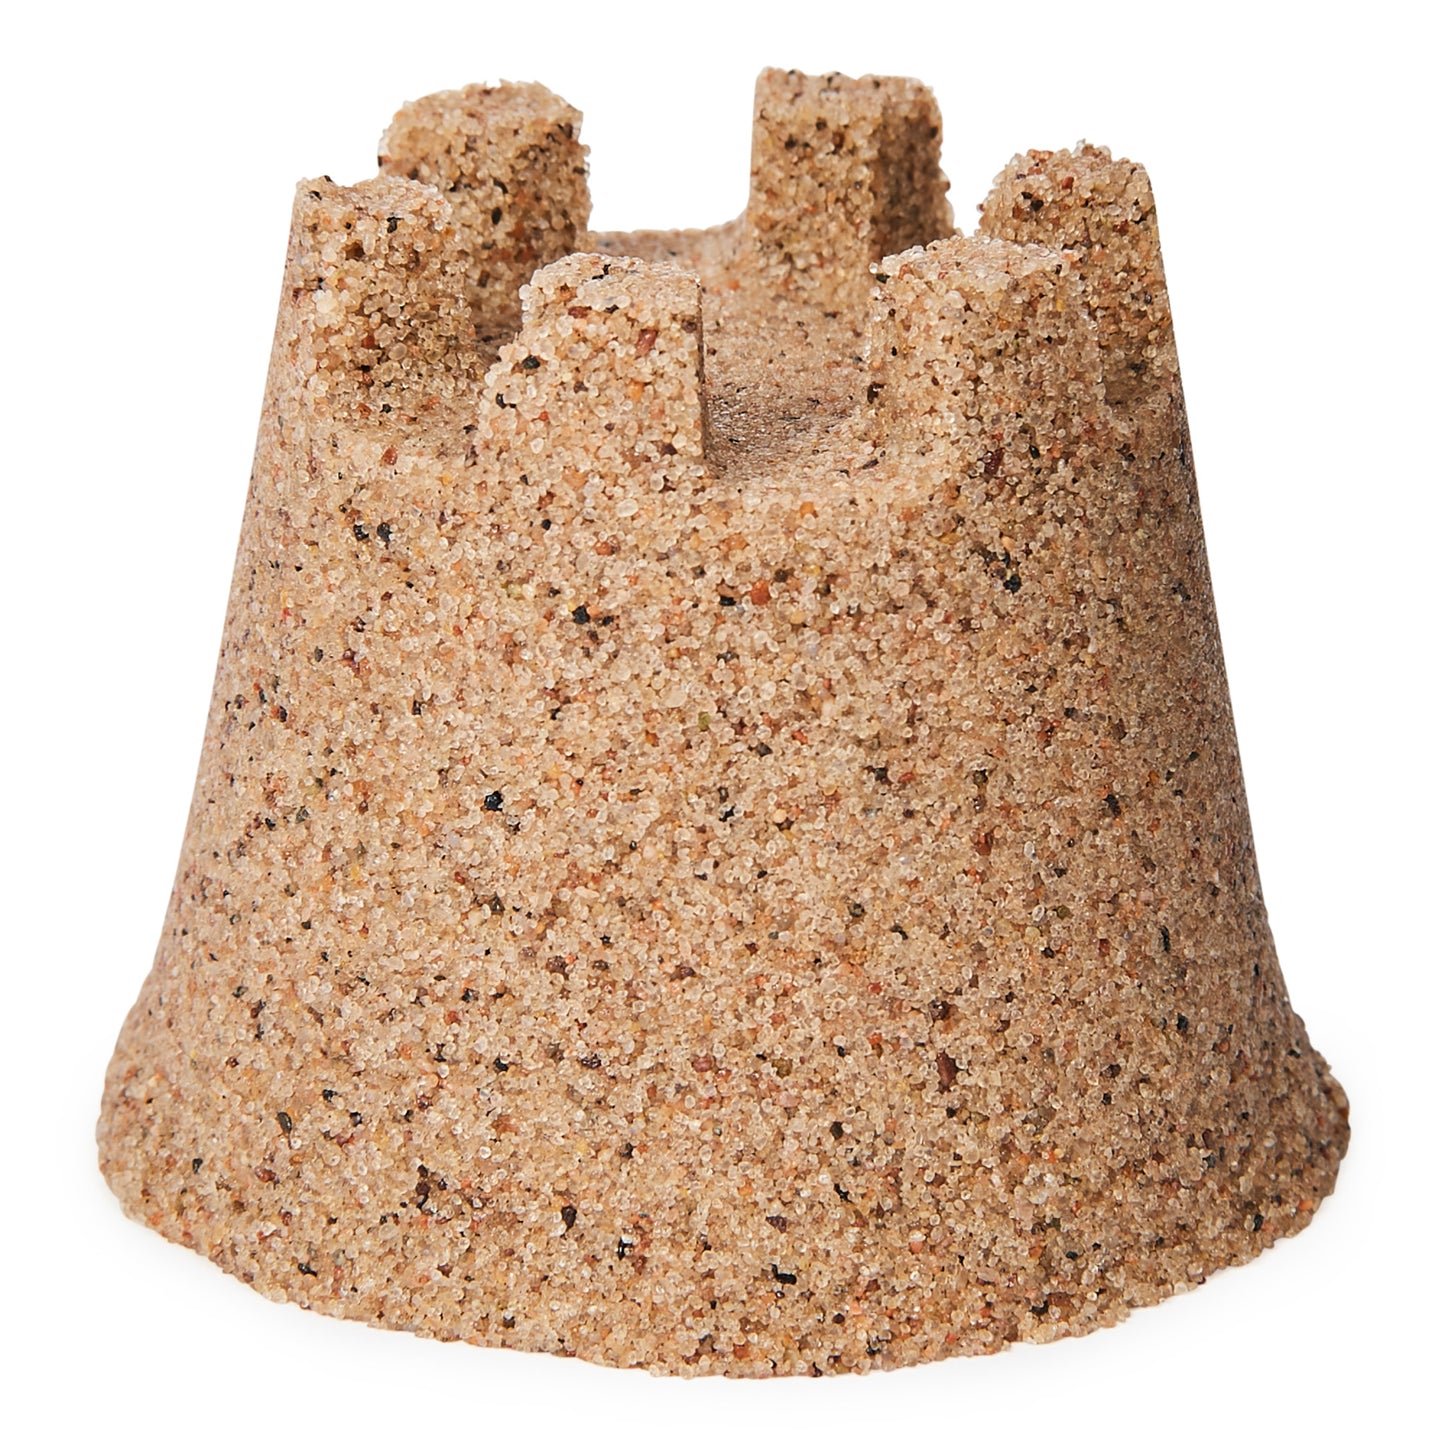 Kinetic Sand, 6.5oz Mini Beach Pail Container, Made with Natural Sand, Play Sand Sensory Toys for Kids Ages 3 and up